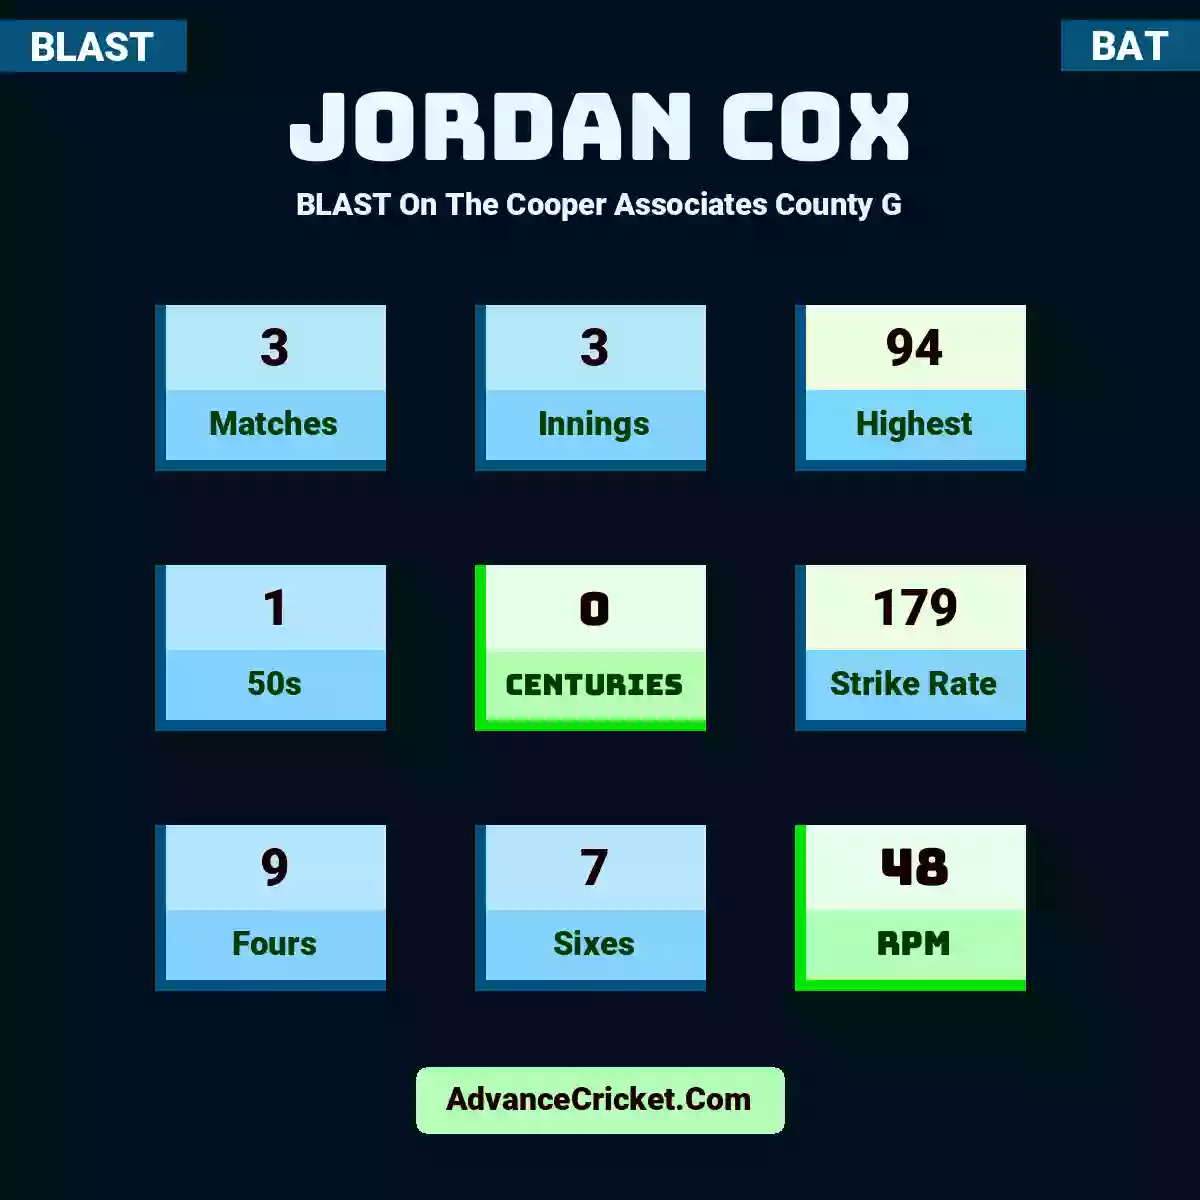 Jordan Cox BLAST  On The Cooper Associates County G, Jordan Cox played 3 matches, scored 94 runs as highest, 1 half-centuries, and 0 centuries, with a strike rate of 179. J.Cox hit 9 fours and 7 sixes, with an RPM of 48.